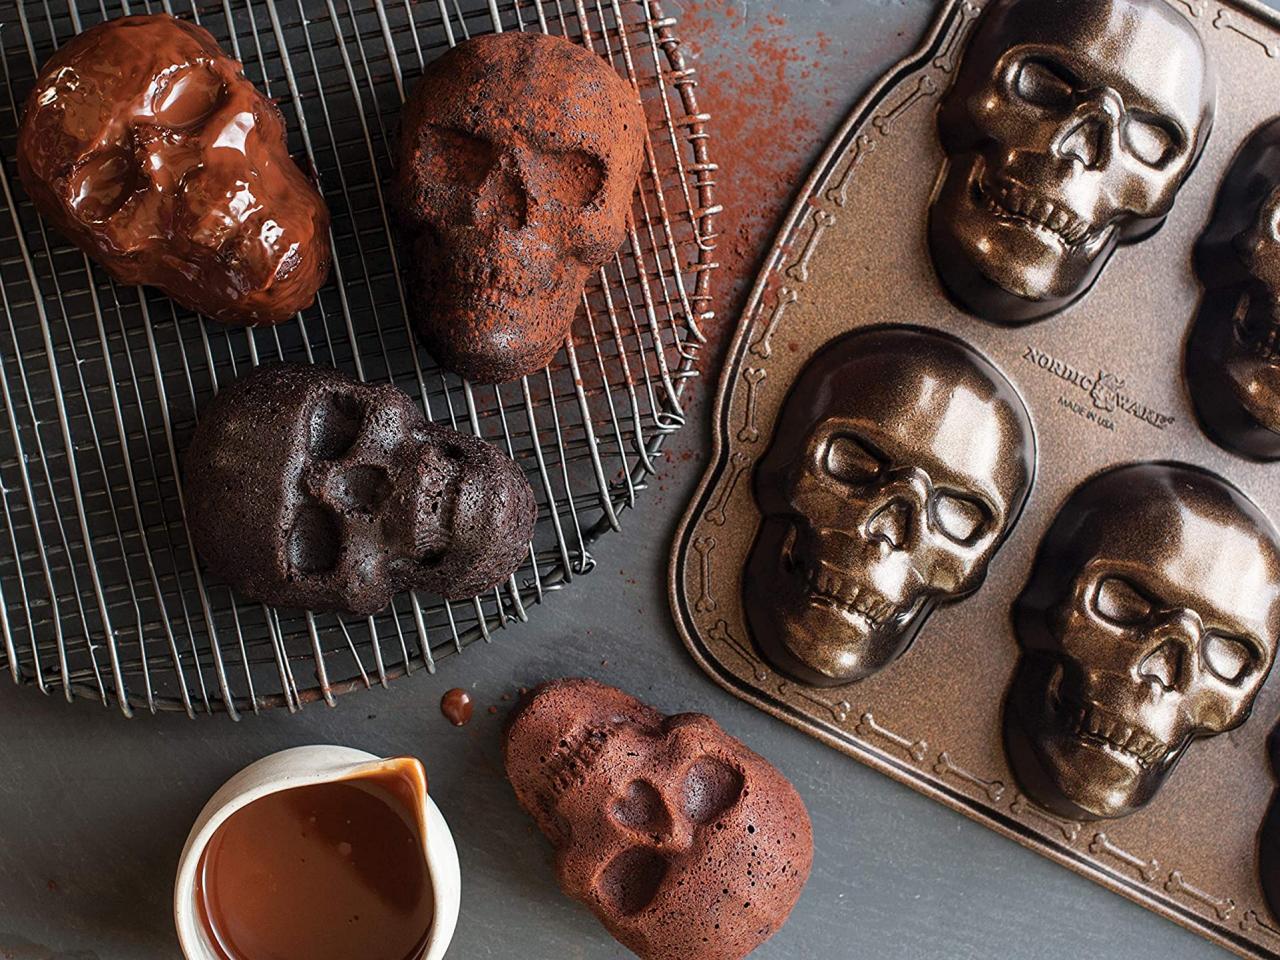 https://food.fnr.sndimg.com/content/dam/images/food/products/2021/10/1/rx_nordic-ware-haunted-skull-cakelet-pan.jpeg.rend.hgtvcom.1280.960.suffix/1633110335853.jpeg